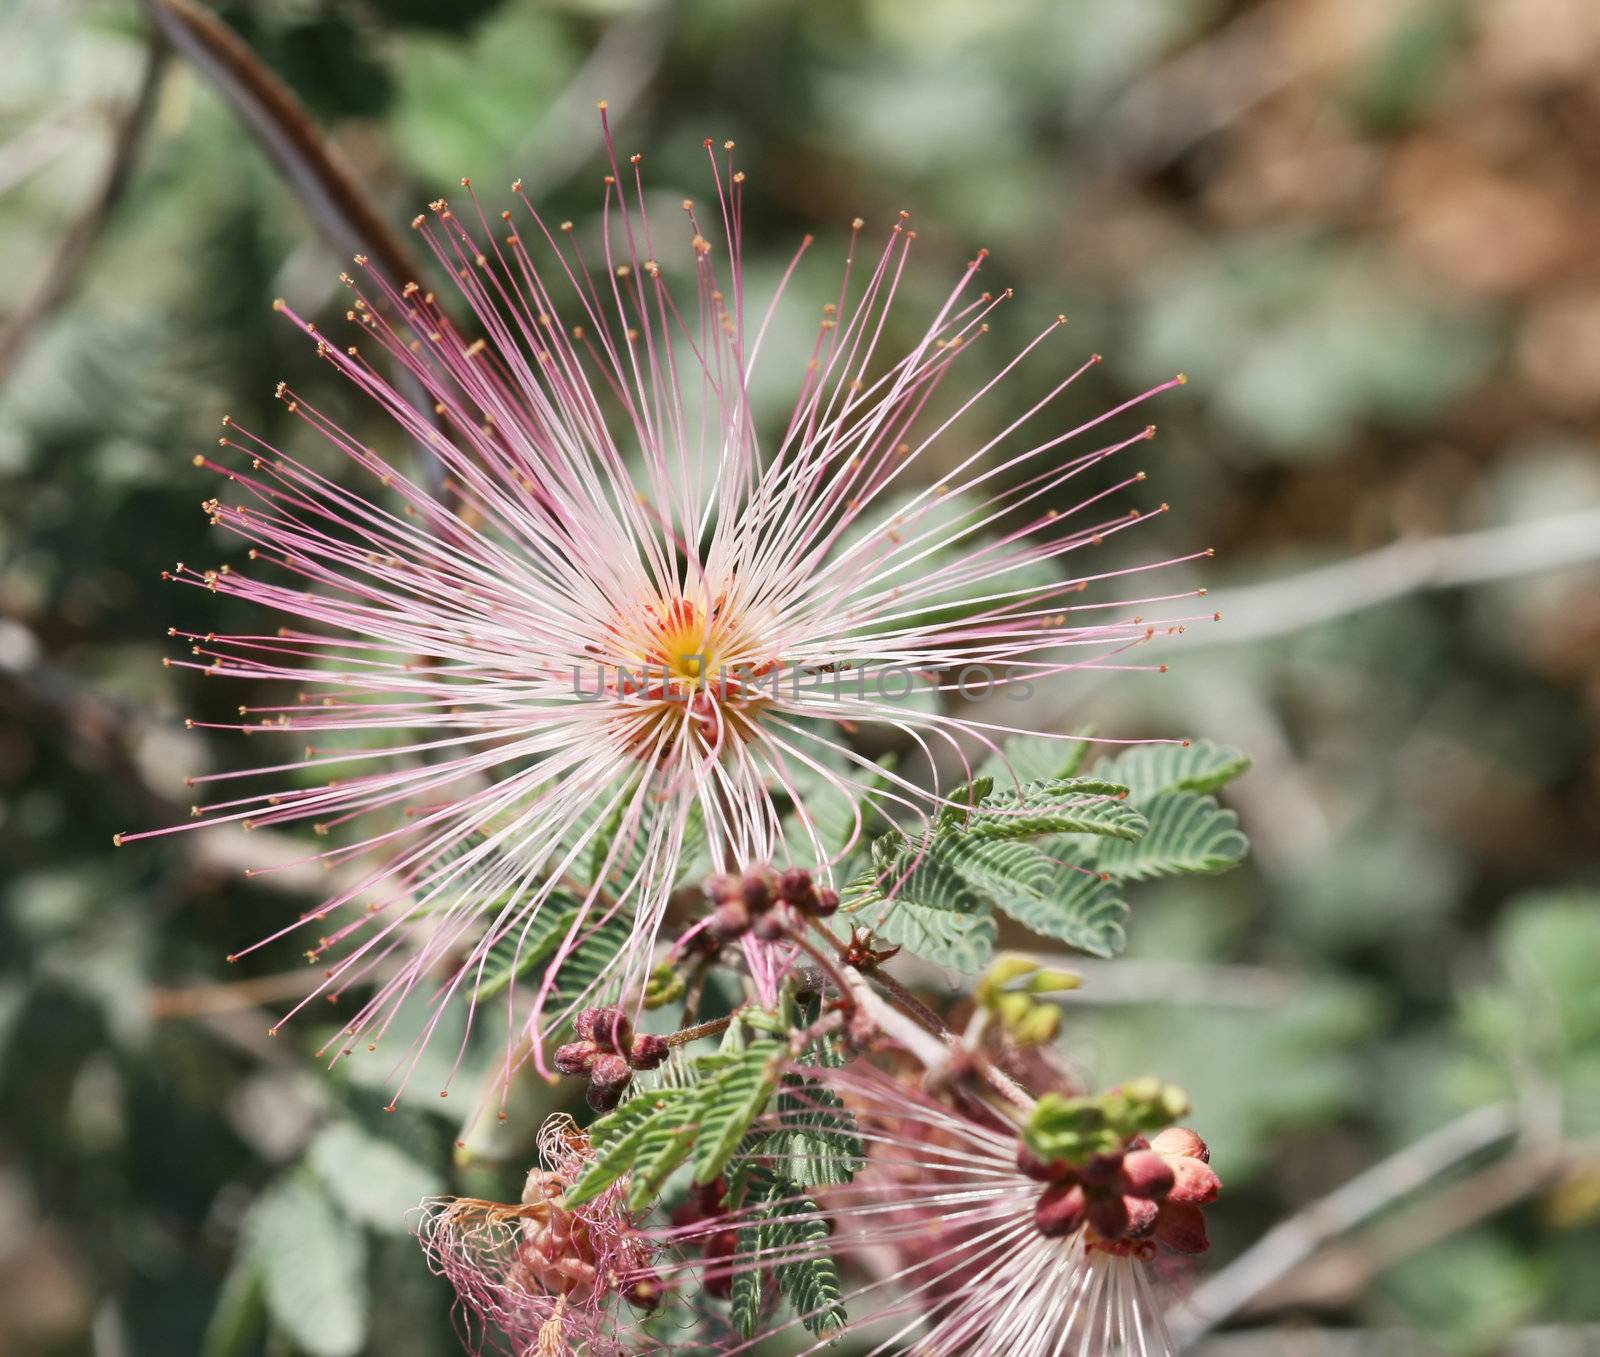 A cool looking desert flower. Macro shot fine detail on the blossom.